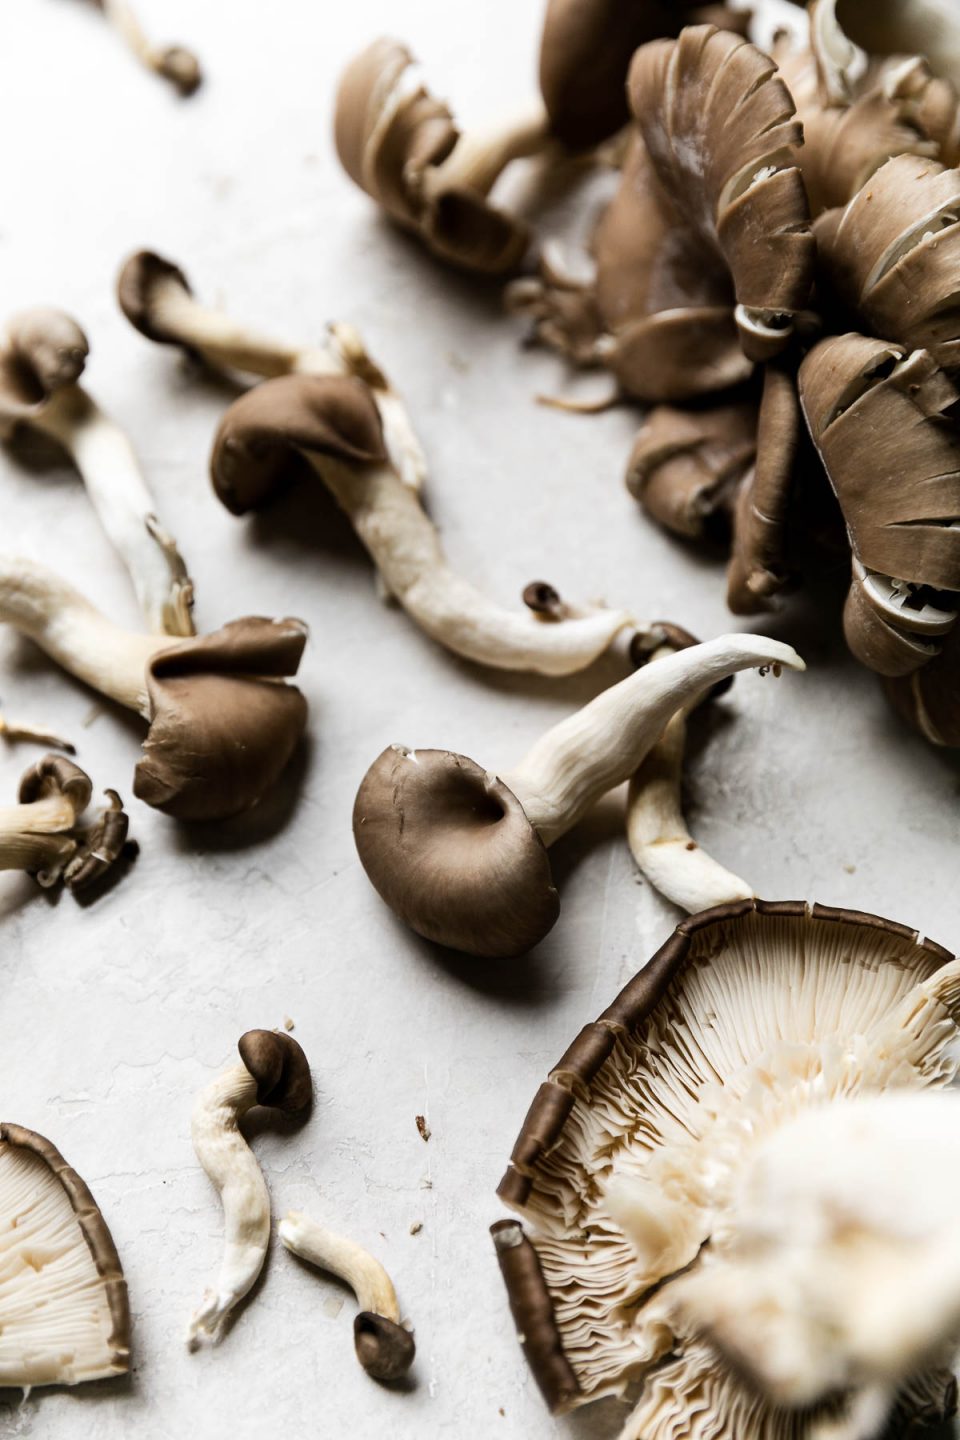 A close up shot of wild mushrooms arranged on a creamy white textured surface.